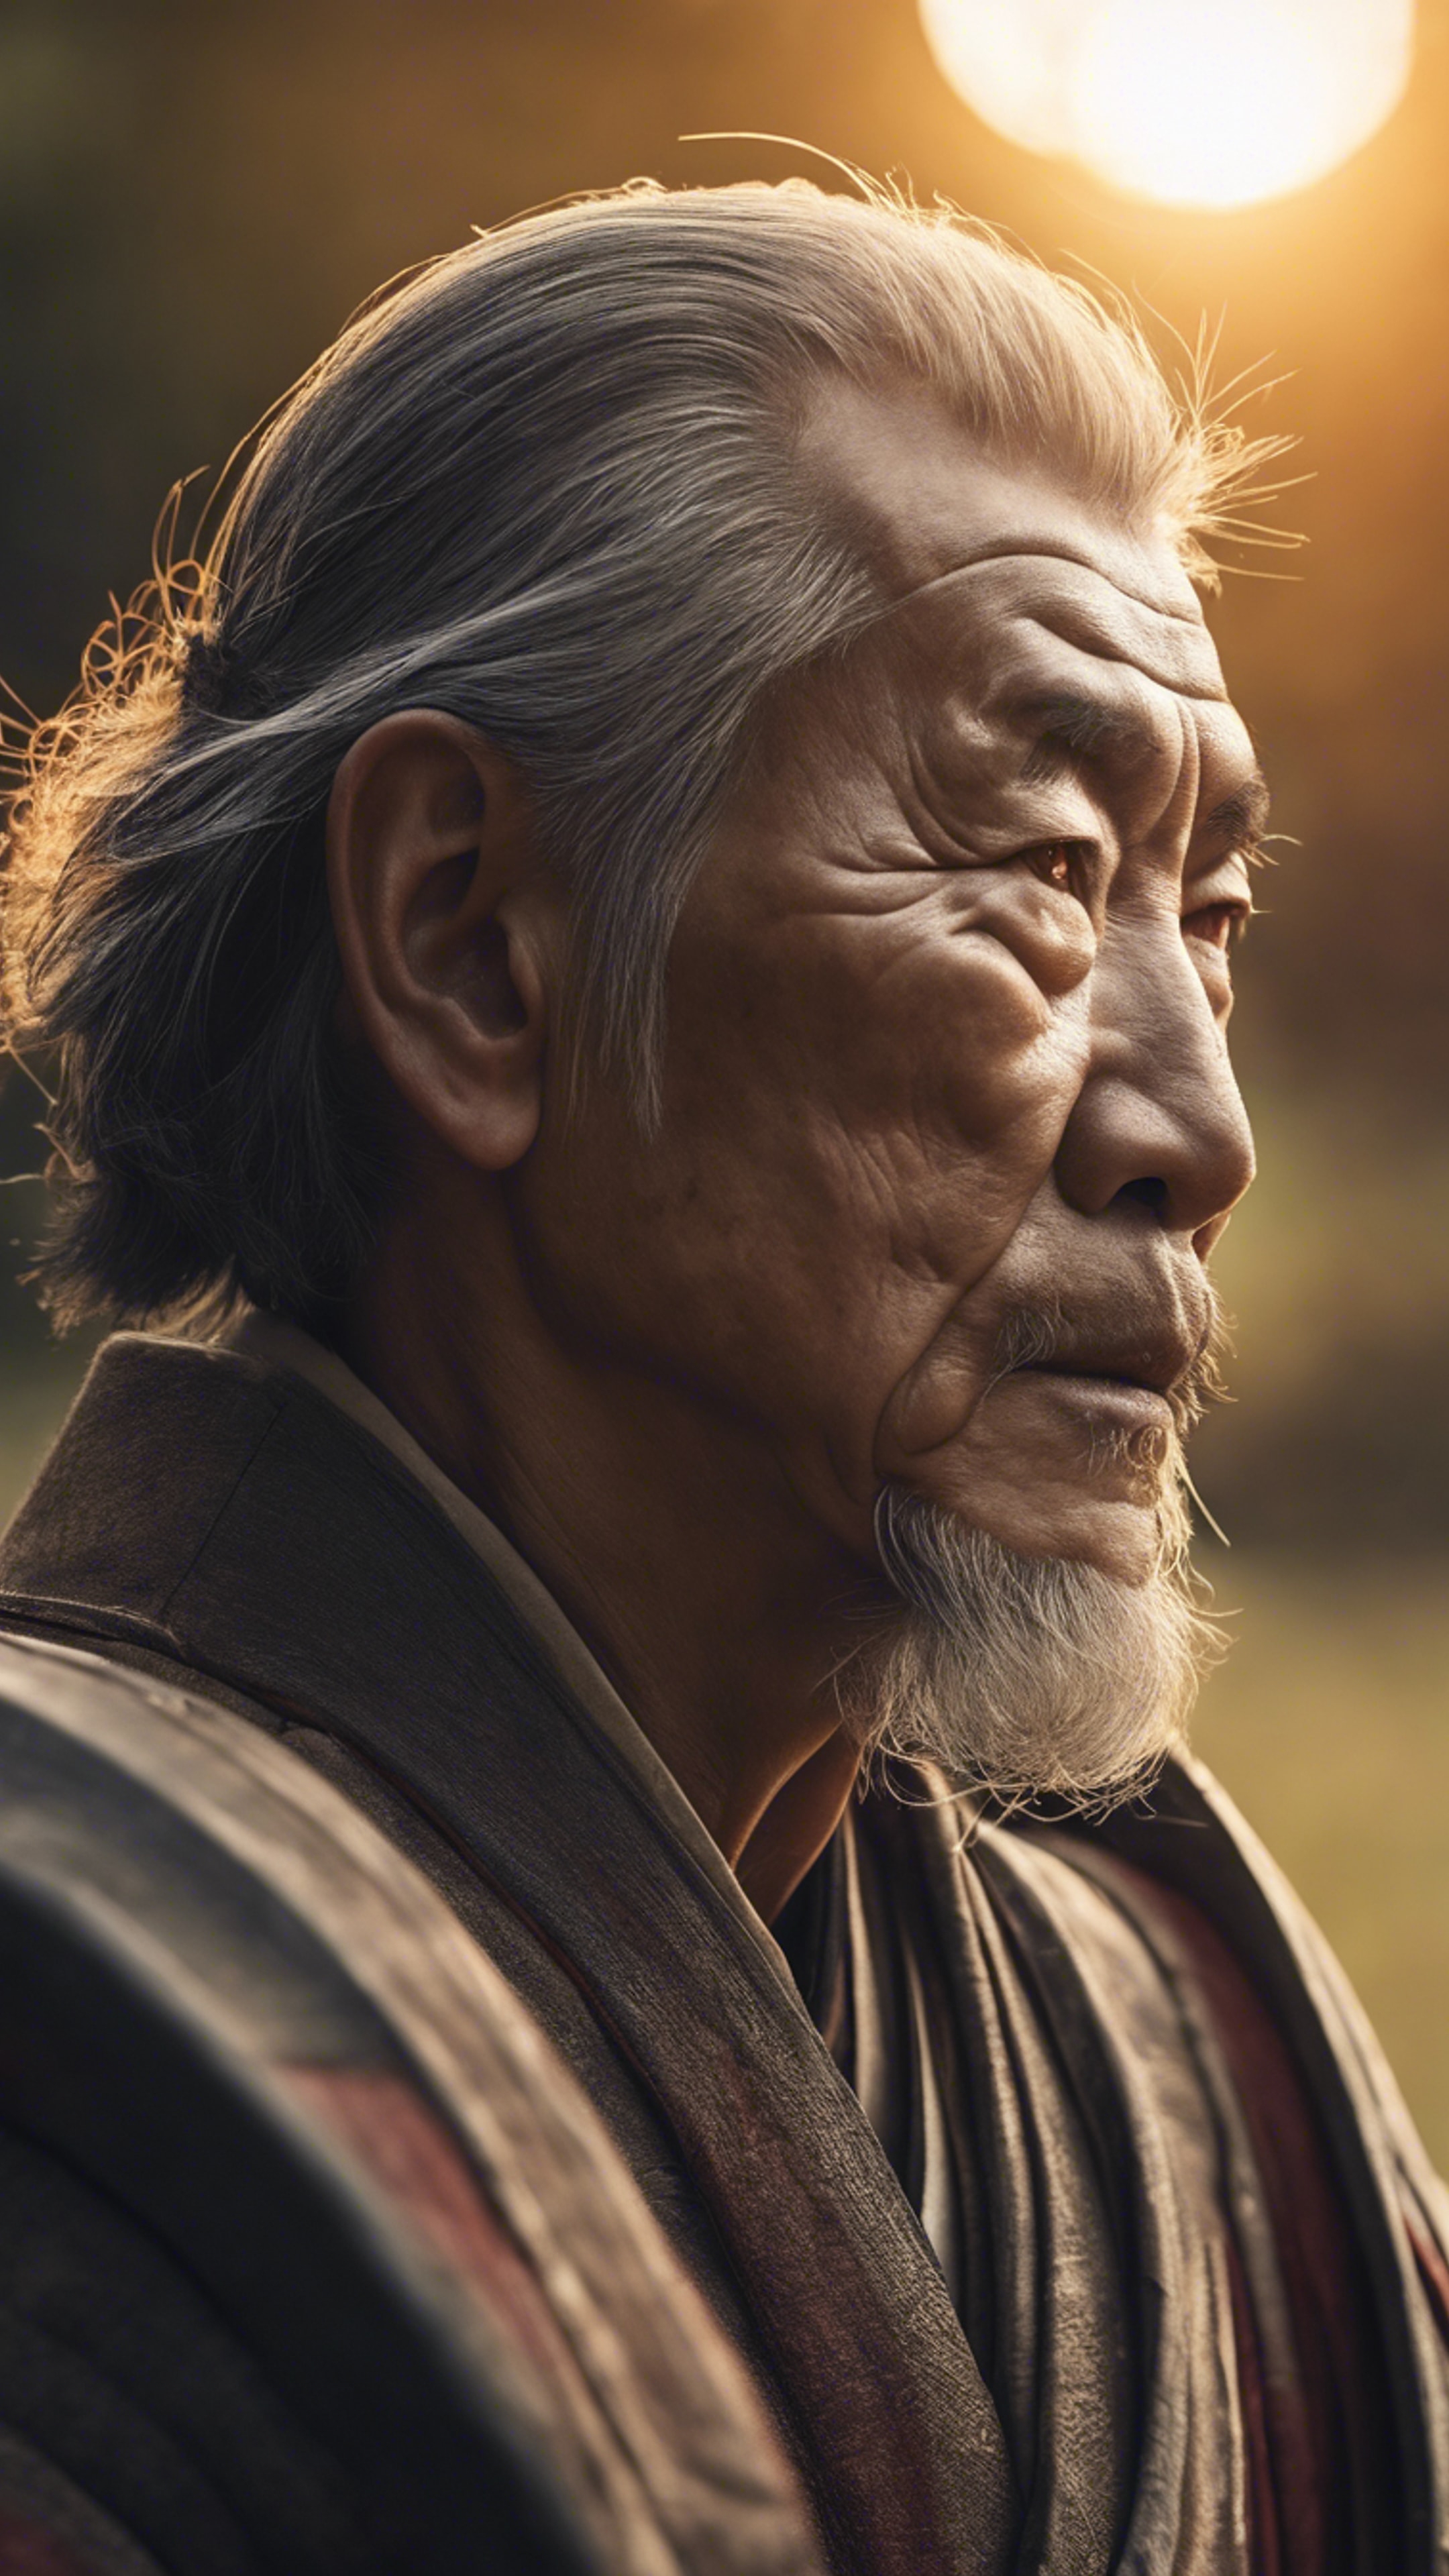 An aged samurai looking towards the sunset with hope in his eyes壁紙[97b9a69422974d9a9e78]